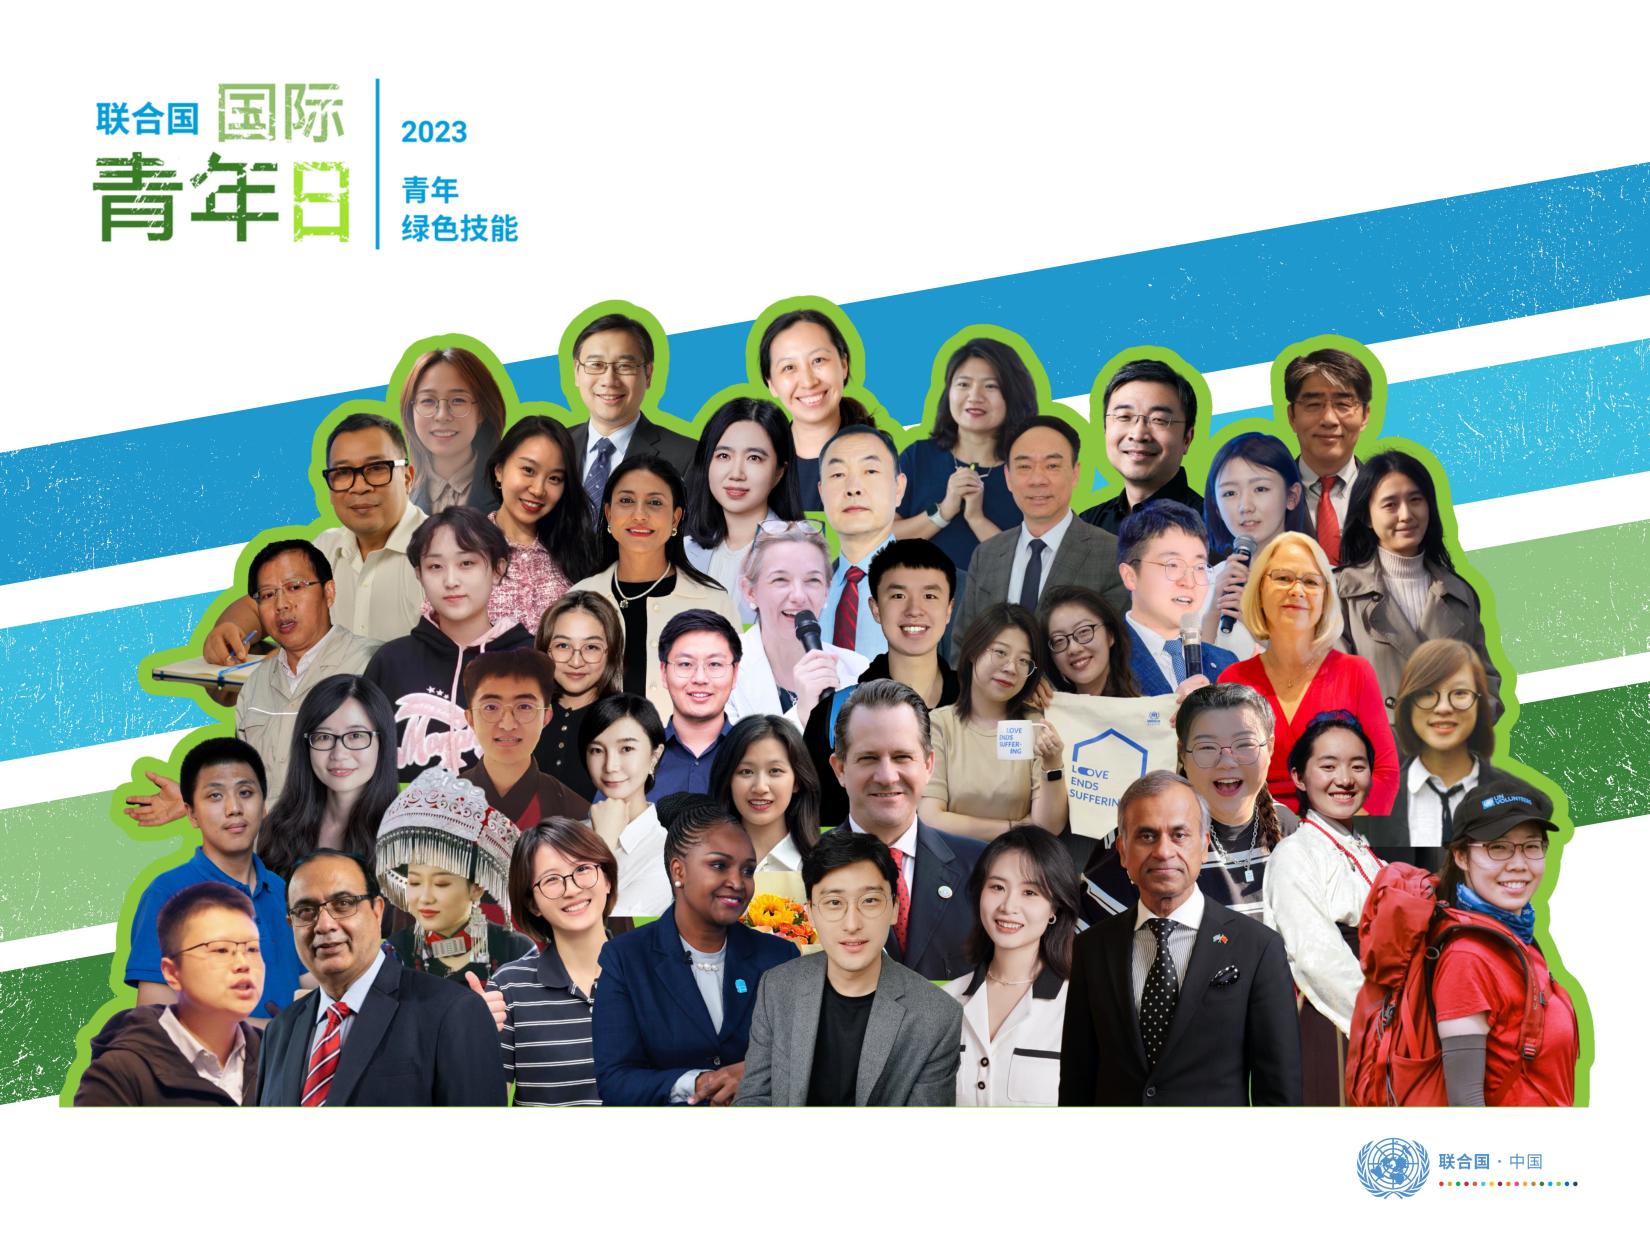 The United Nations Country Team members and their youth partners in China join the International Youth Day poster campaign in 2023